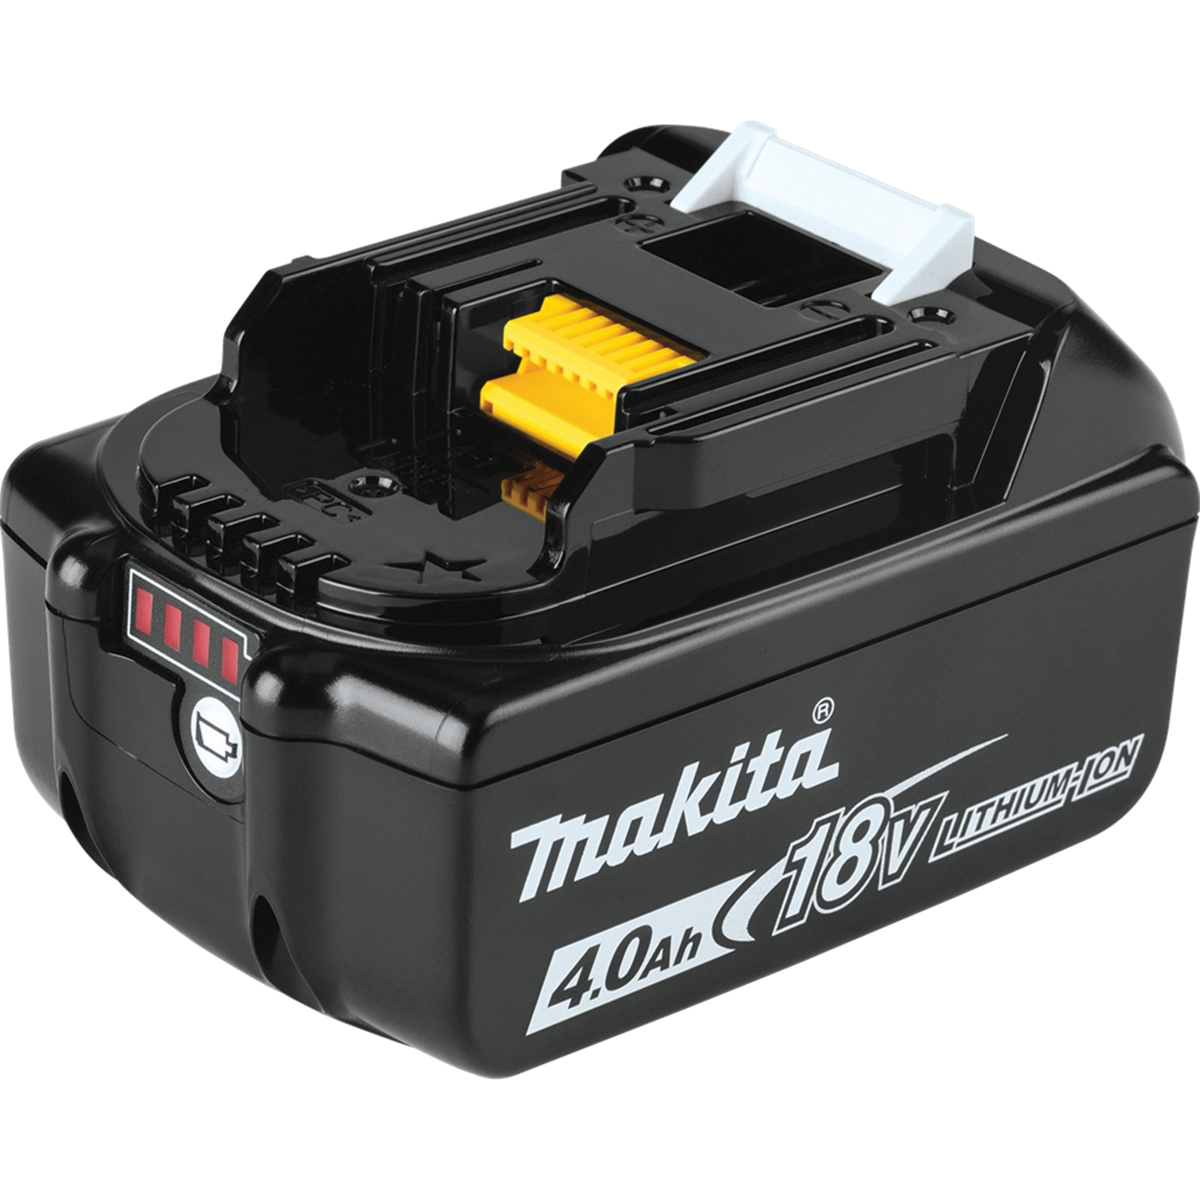 Makita LXT XDT13SM1 Cordless Impact Driver, Battery Included, 18 V, 4 Ah, 1/4 in Drive, Hex Drive, 0 to 3600 ipm - 3